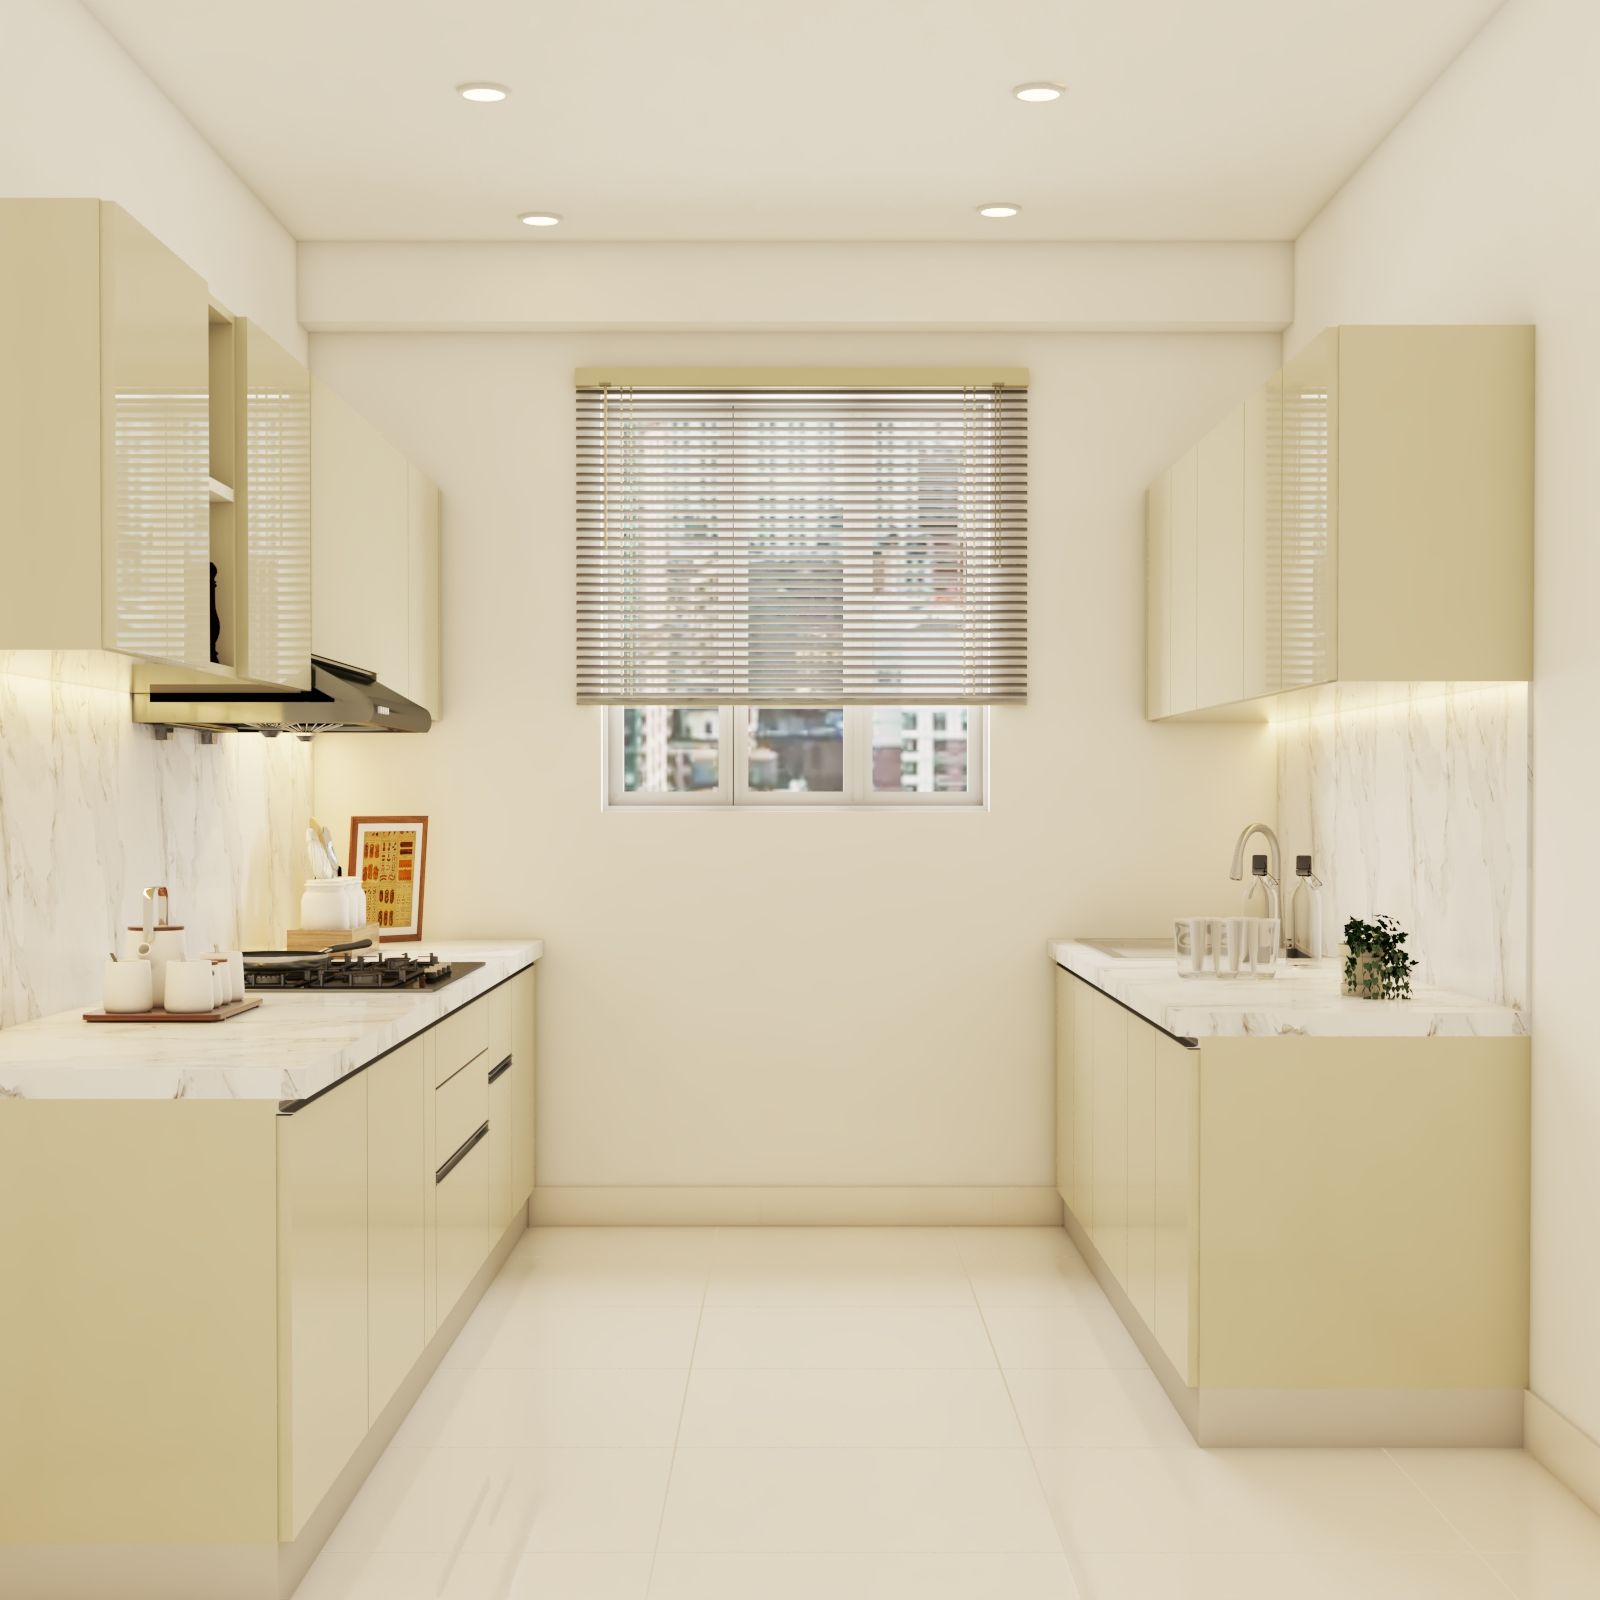 Contemporary Parallel Kitchen Design With Cream Cabinets